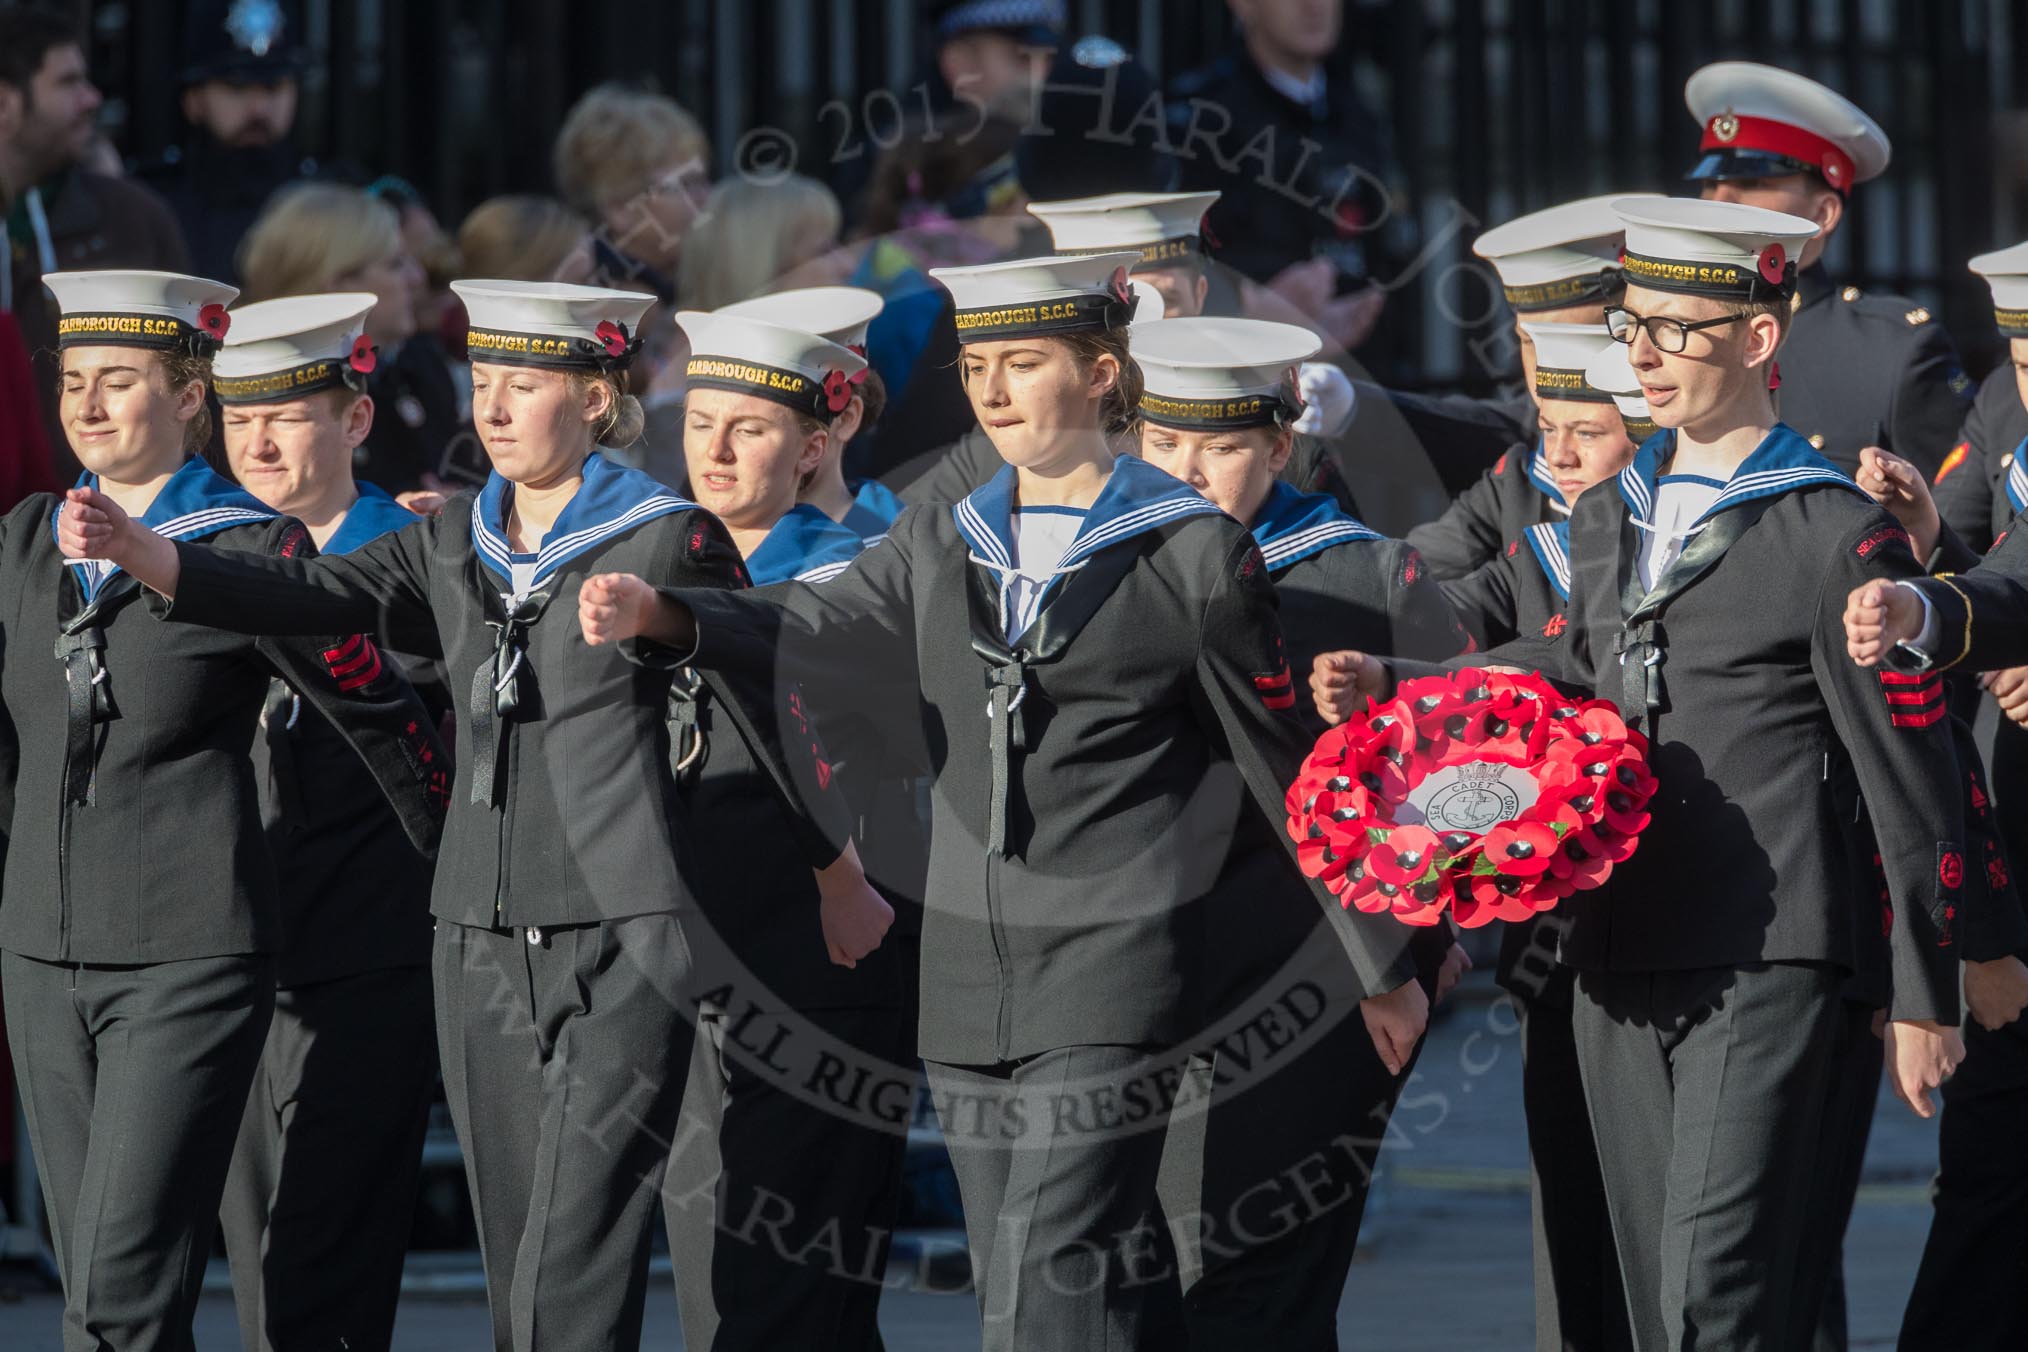 March Past, Remembrance Sunday at the Cenotaph 2016: M32 Army and combined Cadet Force.
Cenotaph, Whitehall, London SW1,
London,
Greater London,
United Kingdom,
on 13 November 2016 at 13:17, image #2788